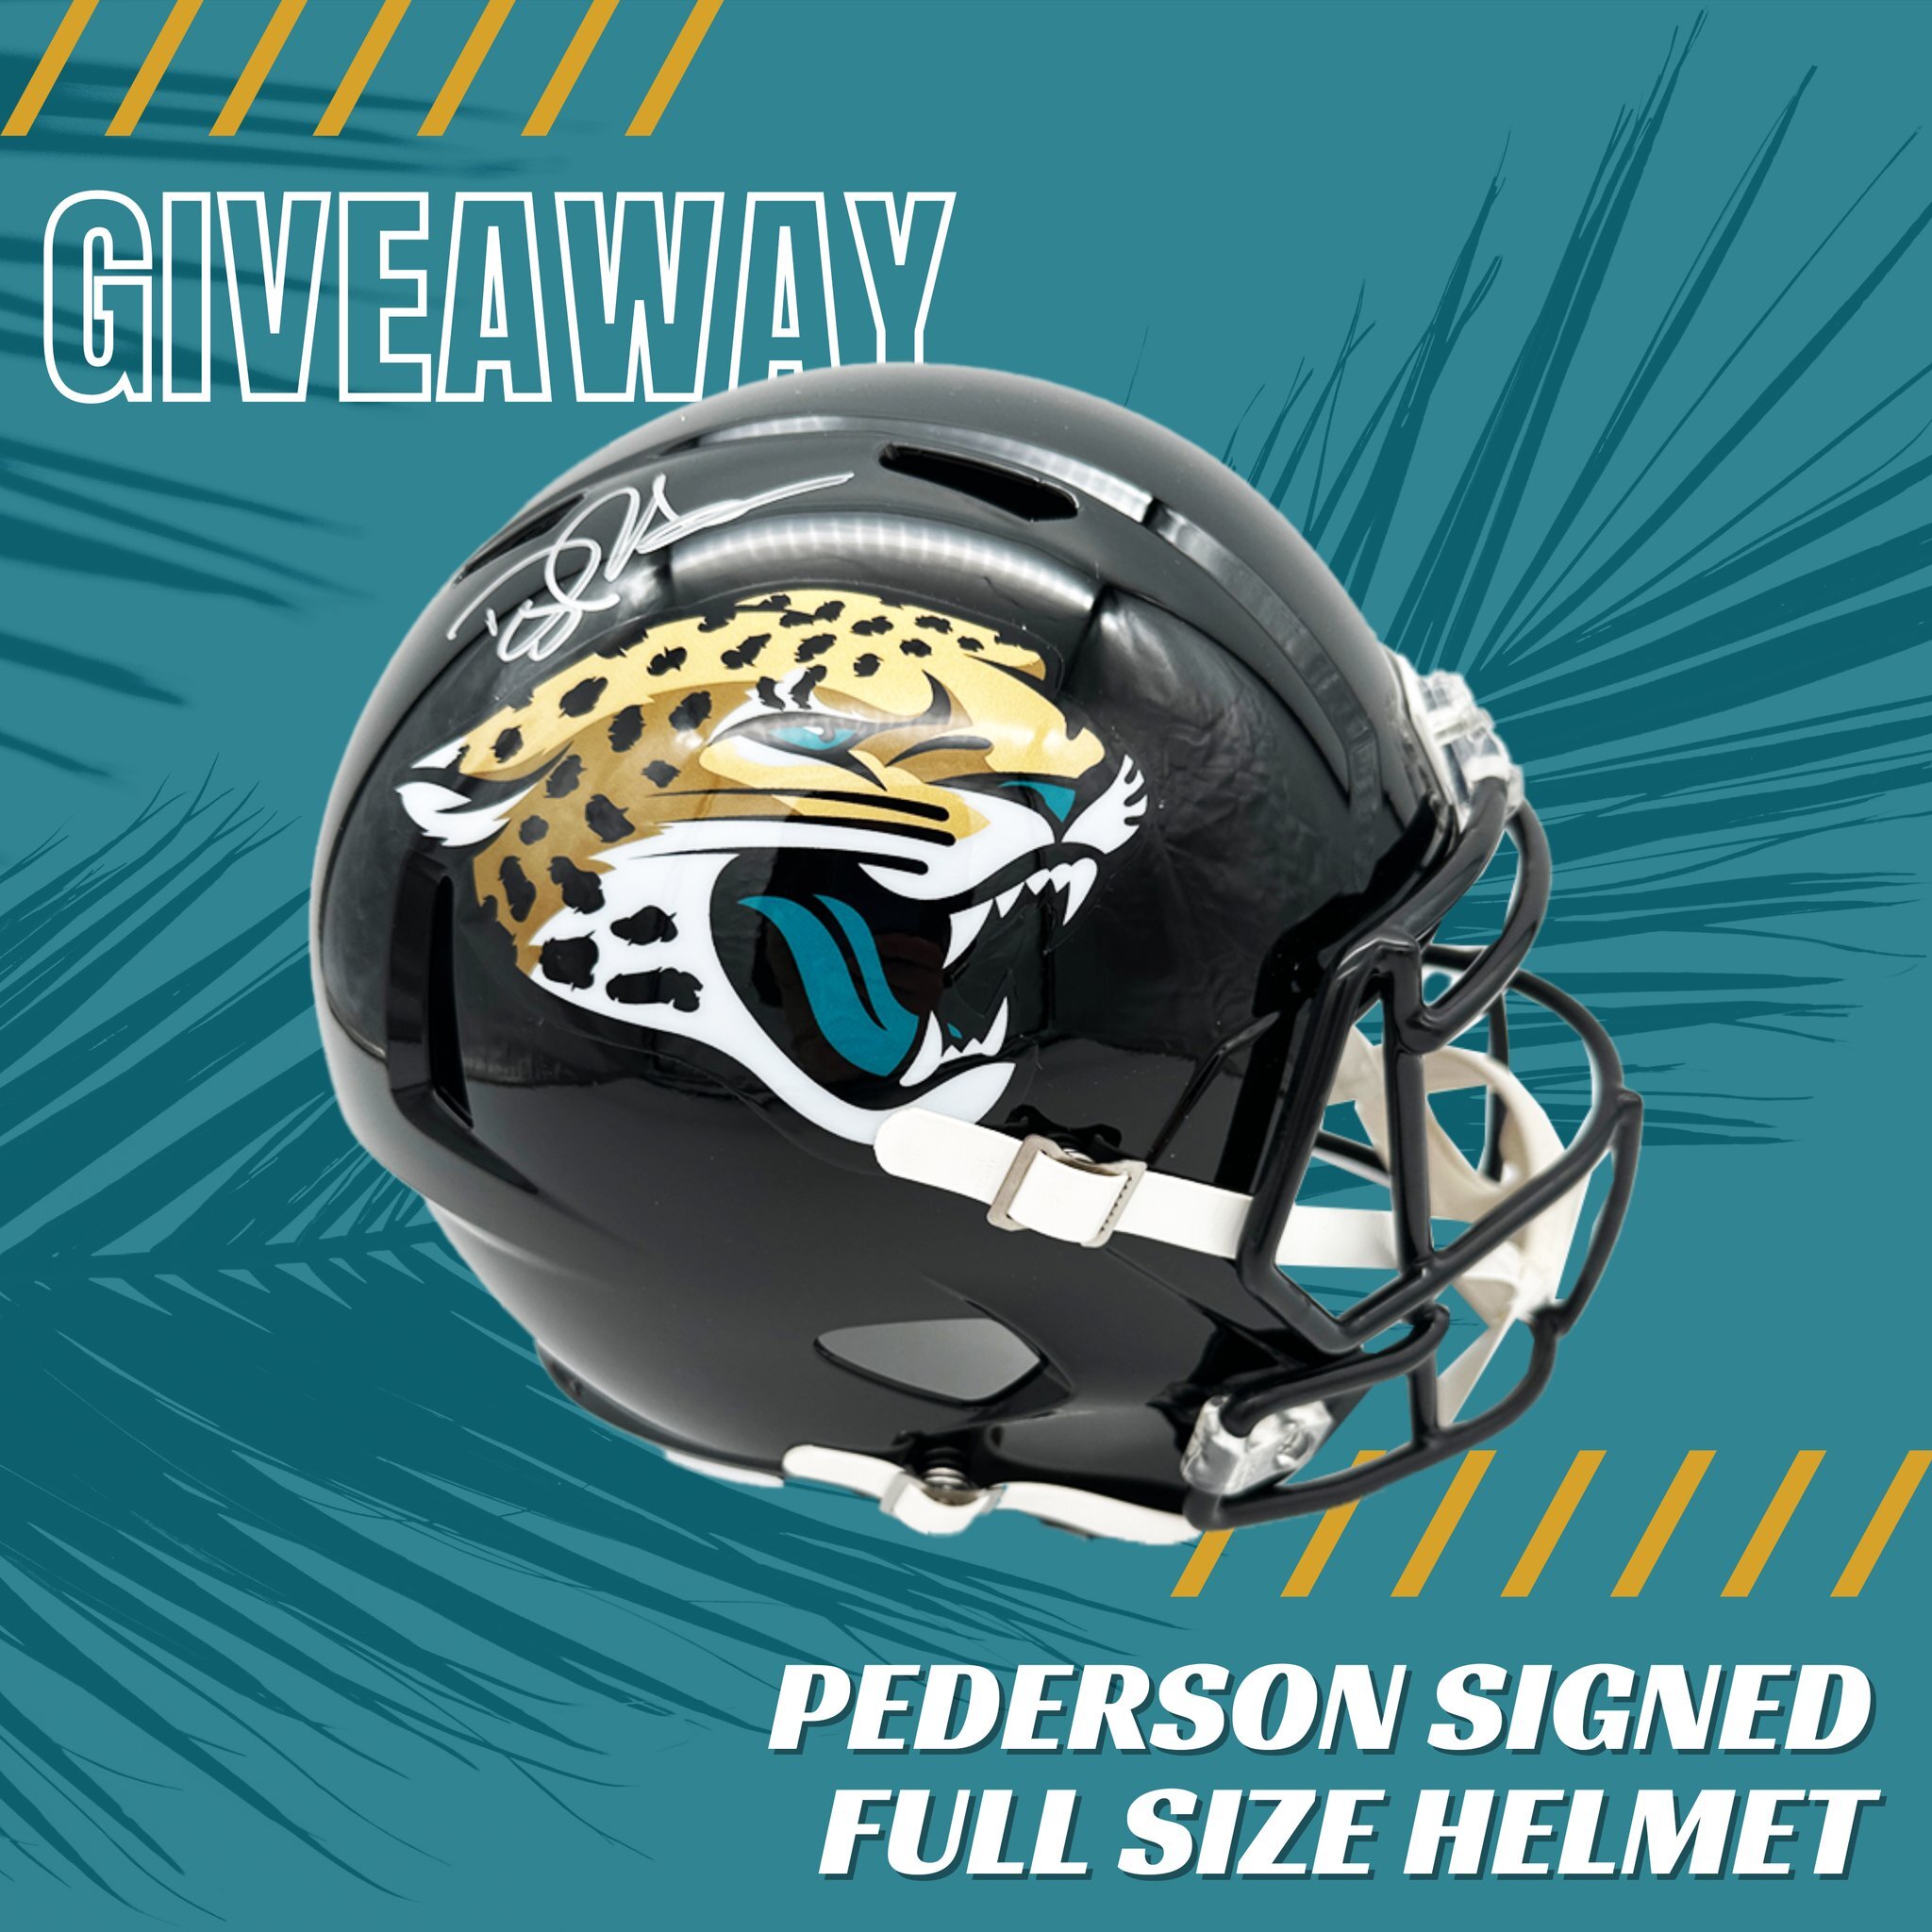 🔥 Attention all #Duuuuval Fans! 🔥

🏈 Gear up to win an exclusive Pederson✍️ Full Size Helmet! 🐆 Don't miss this chance to score big this weekend!

🎁 Head over to the Jaguars Team App ➡️ Jags Bids ➡️ Filter ➡️ Giveaways, or visit jaguars.com/jags